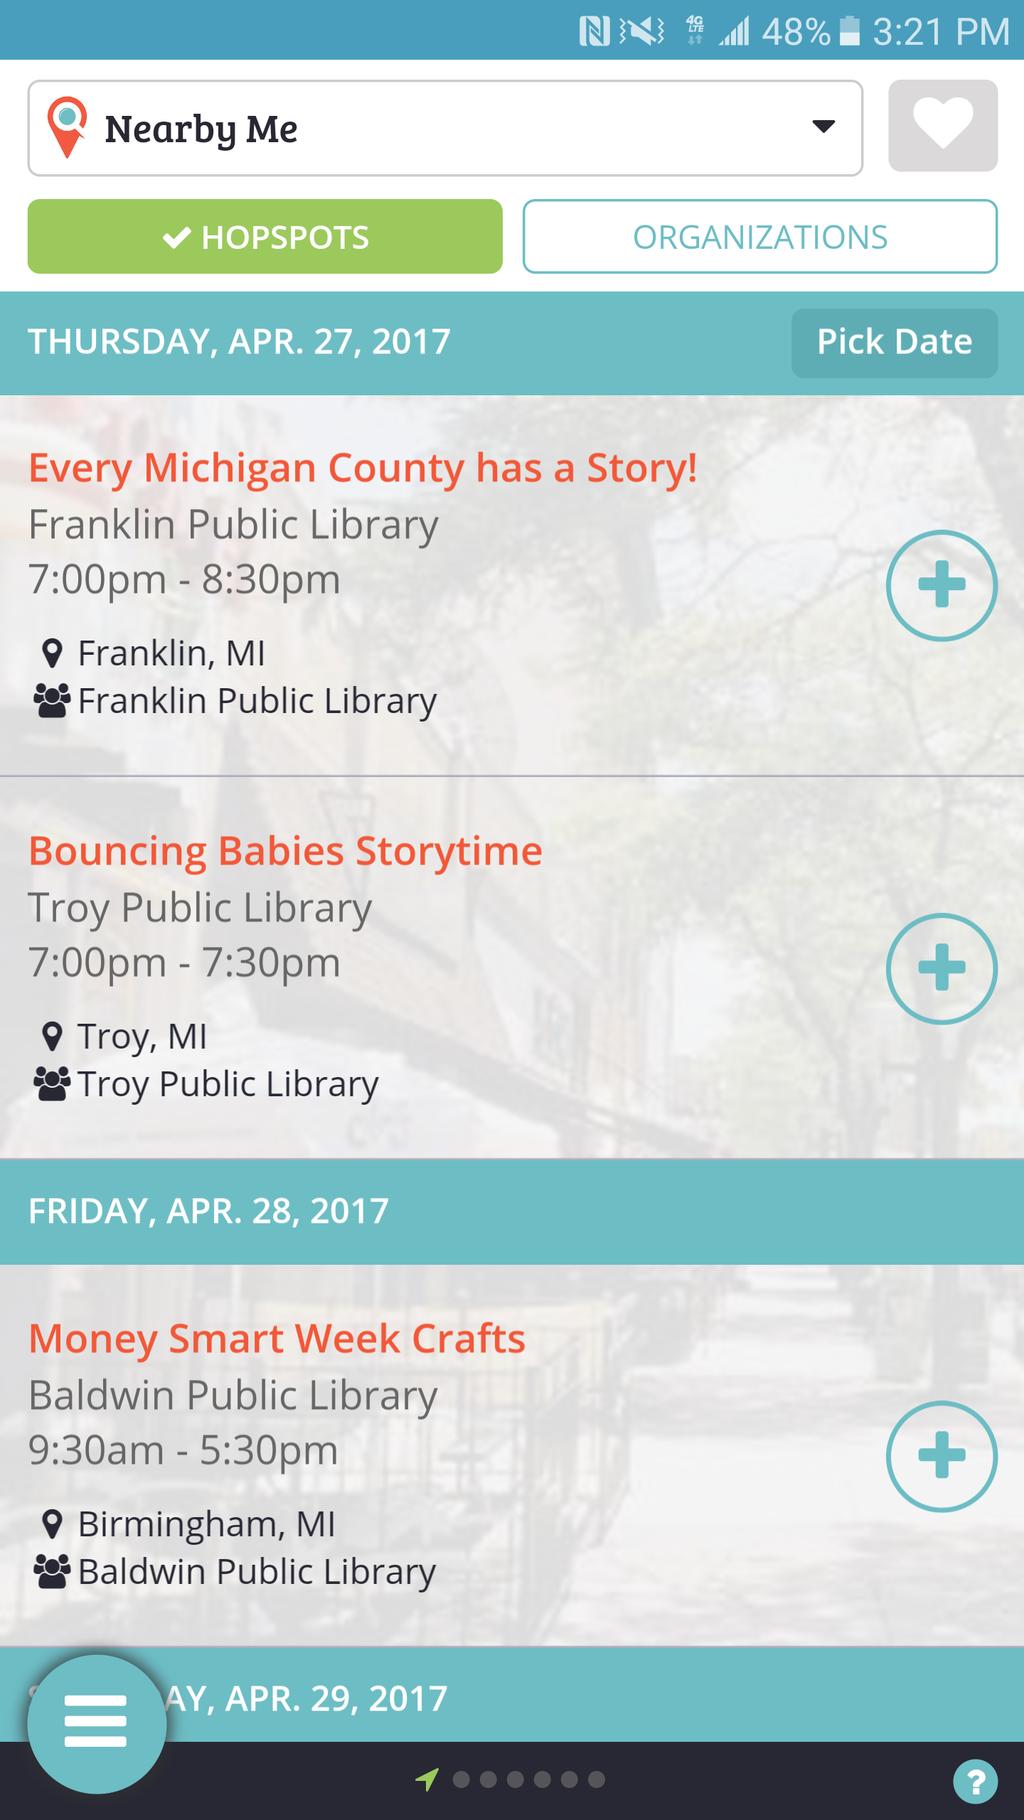 4 With LocalHop you can discover new events and organizations you might never have known about.